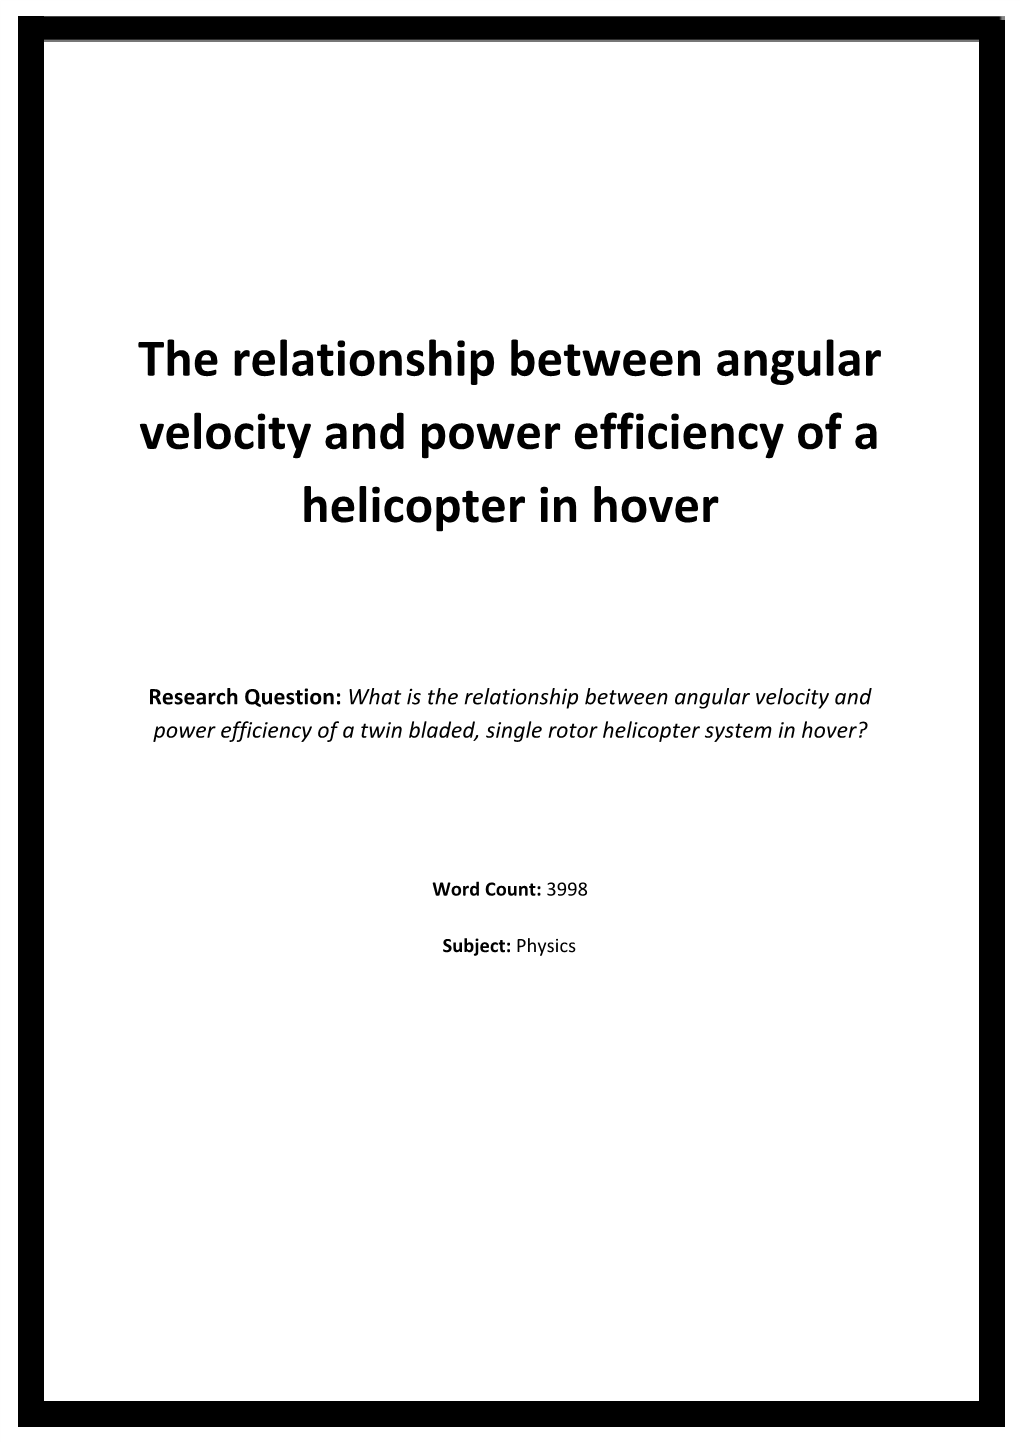 The Relationship Between Angular Velocity and Power Efficiency of a Helicopter in Hover